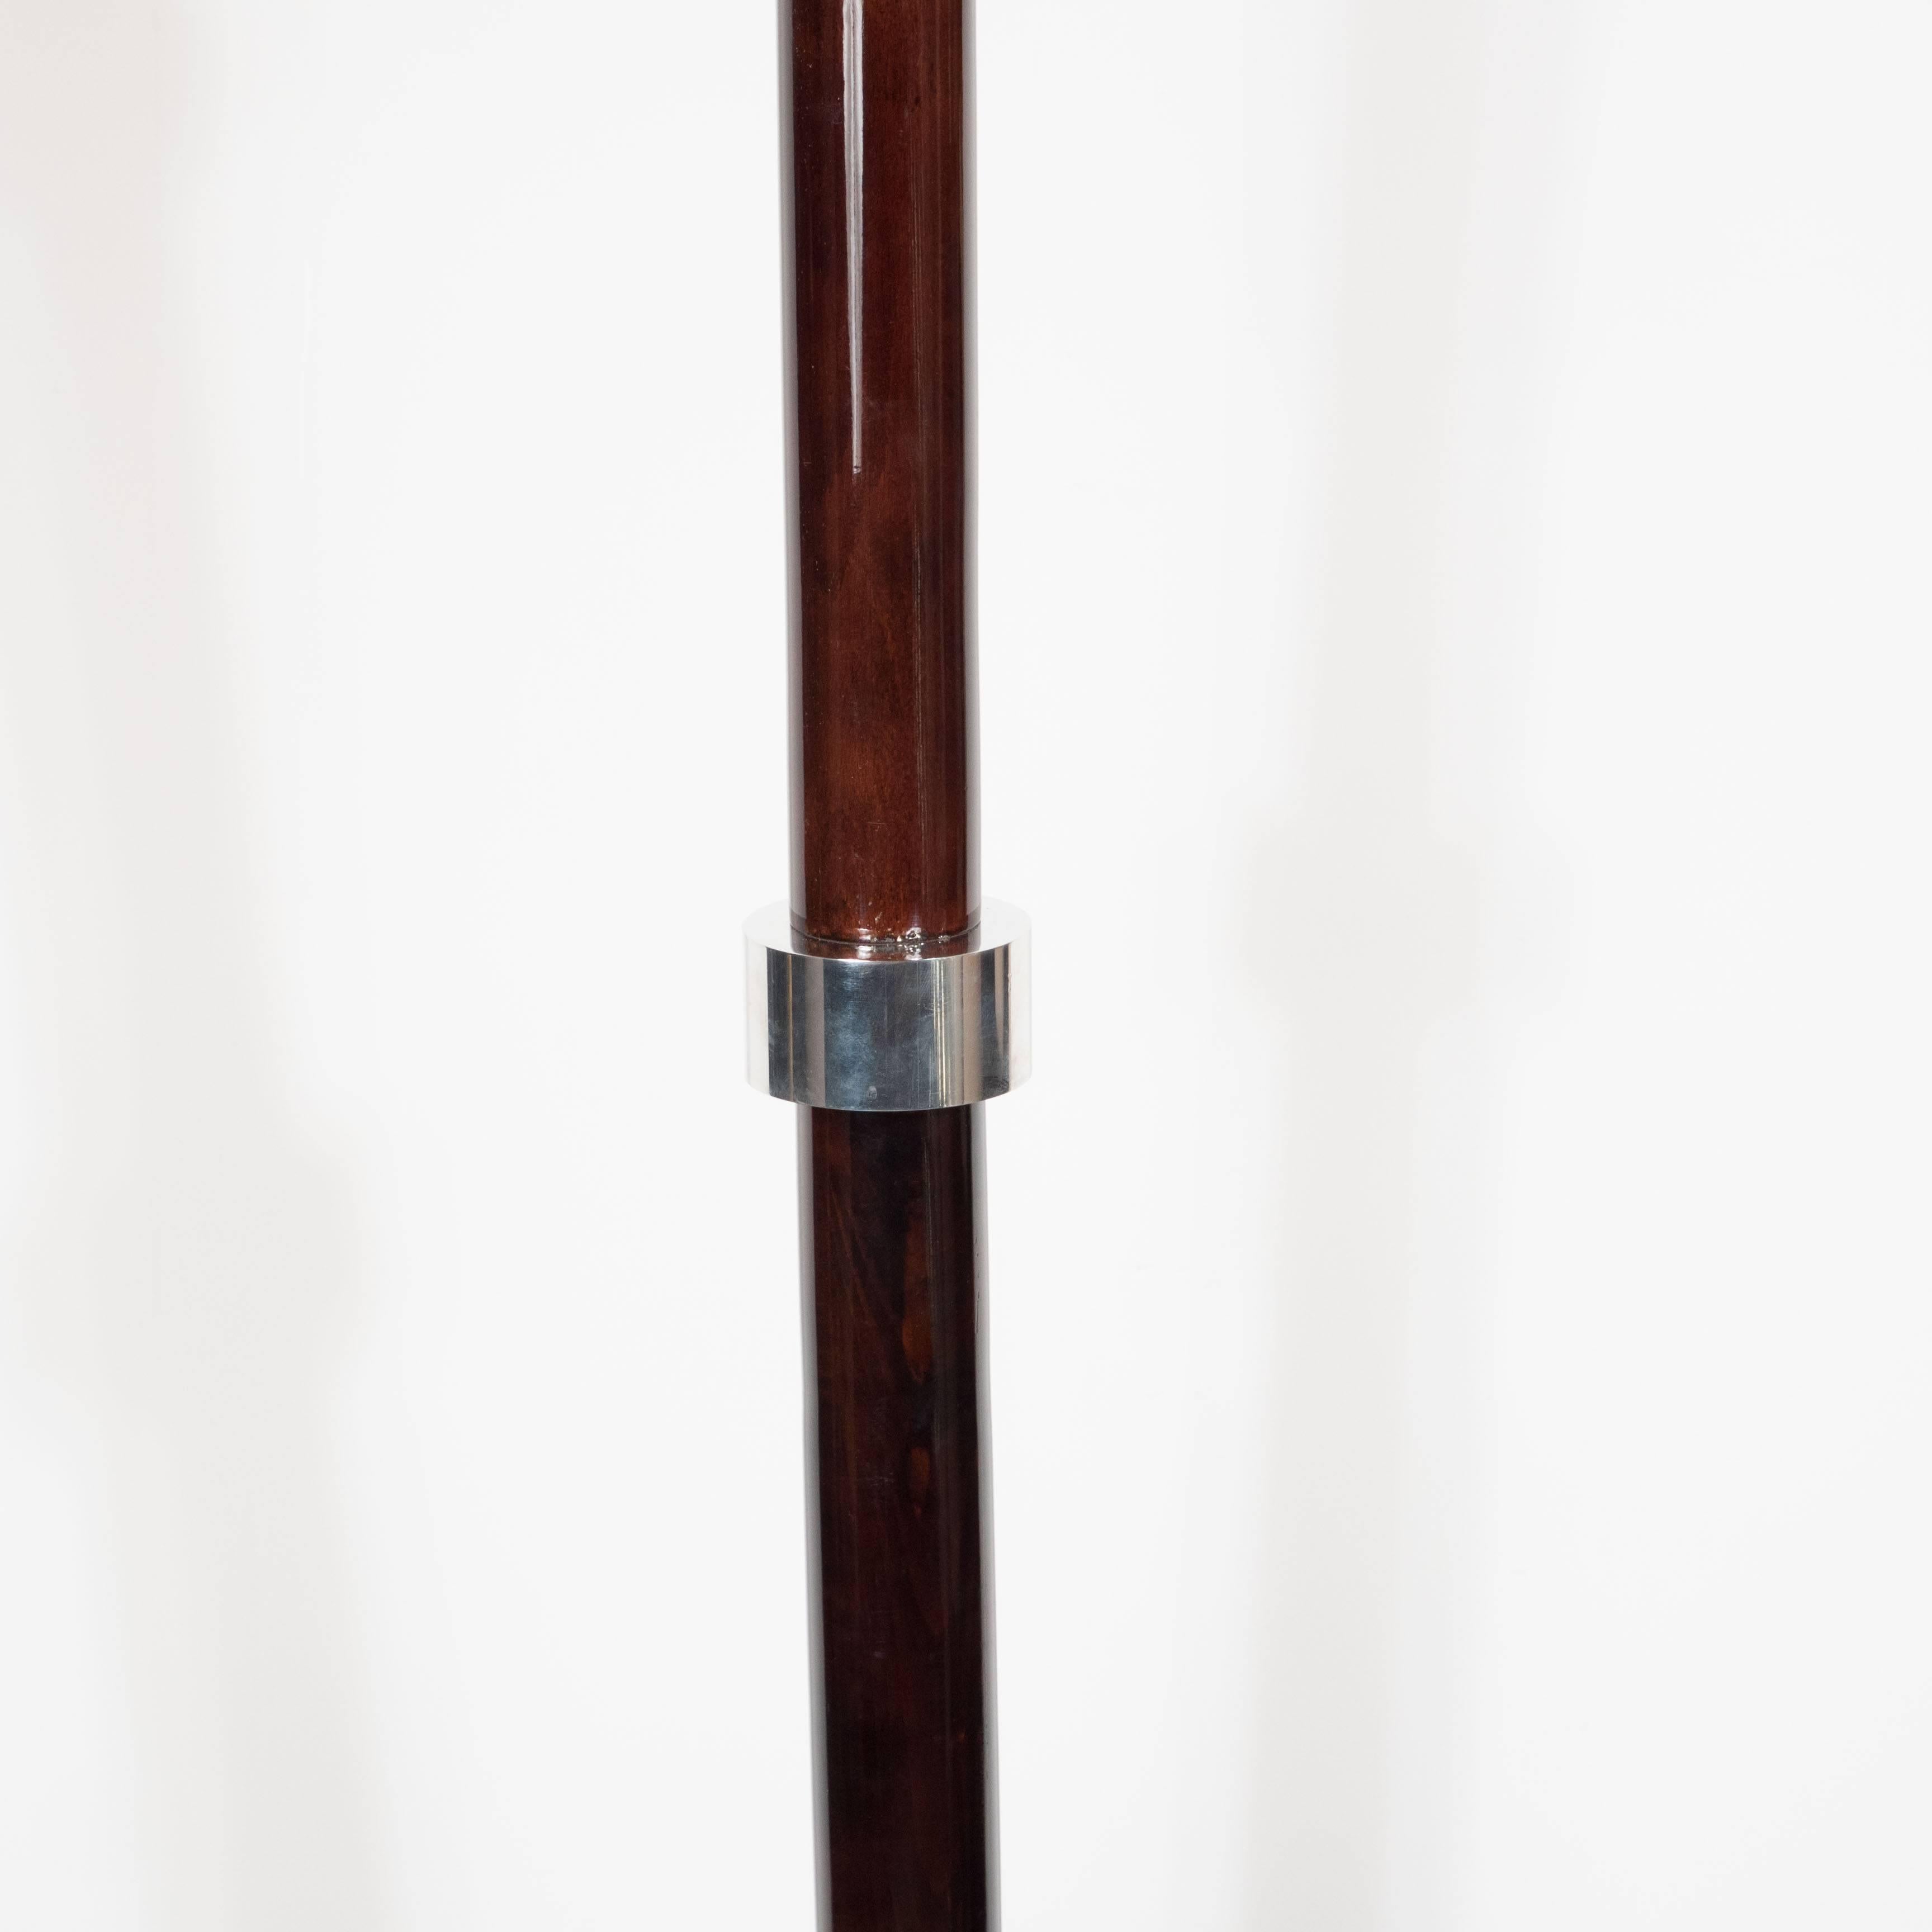 Mid-20th Century French Art Deco Mahogany and Chrome Skyscraper Style Torchiere Lamp